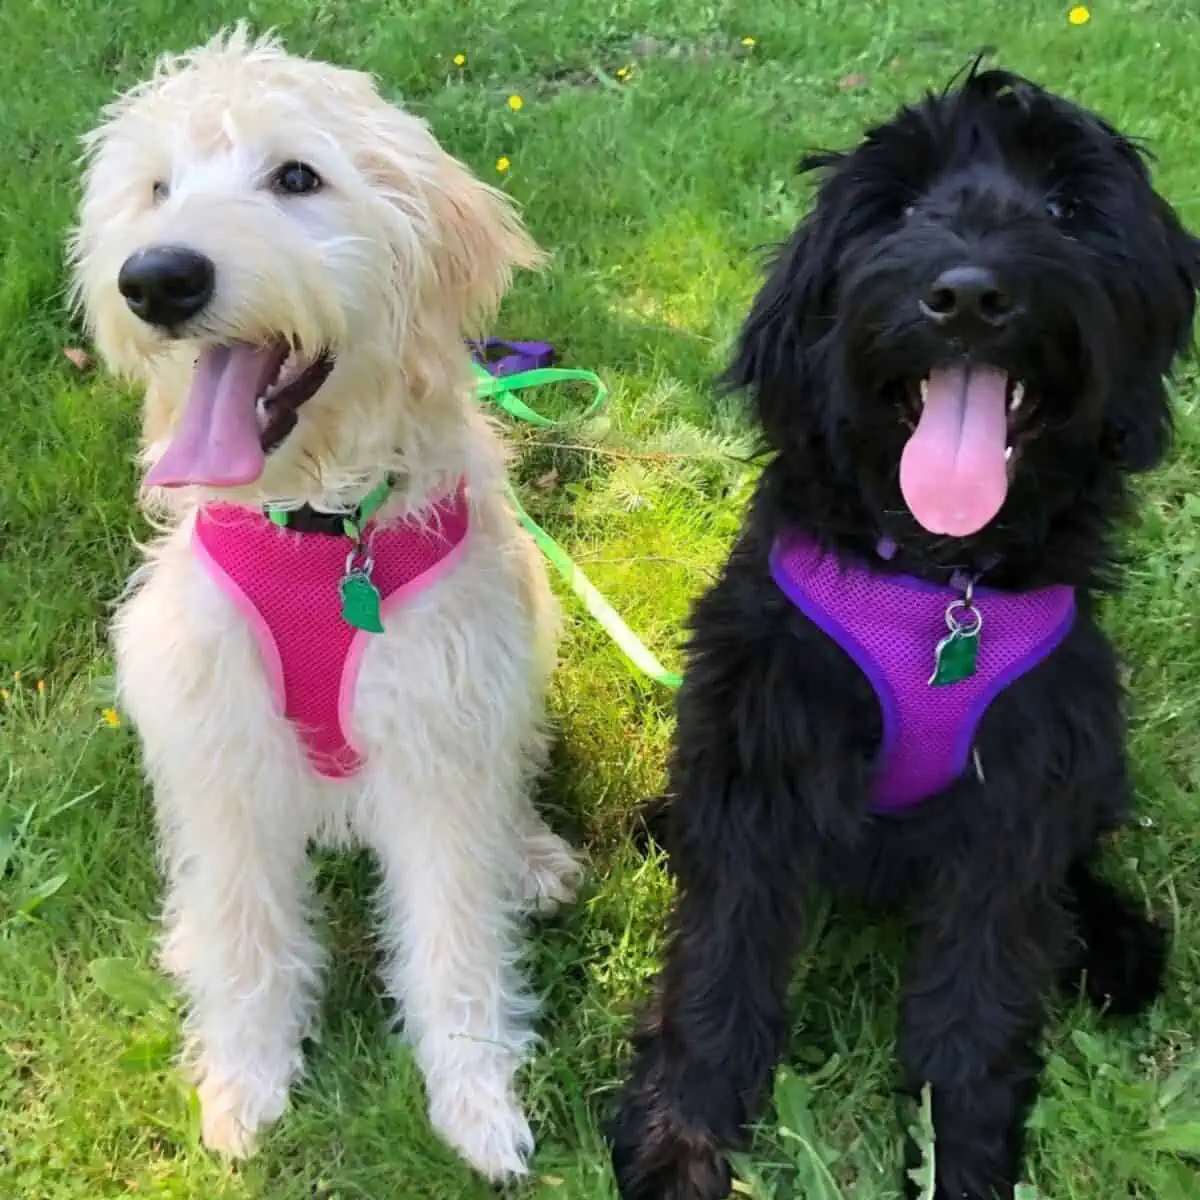 two Goldendoodles with different colors